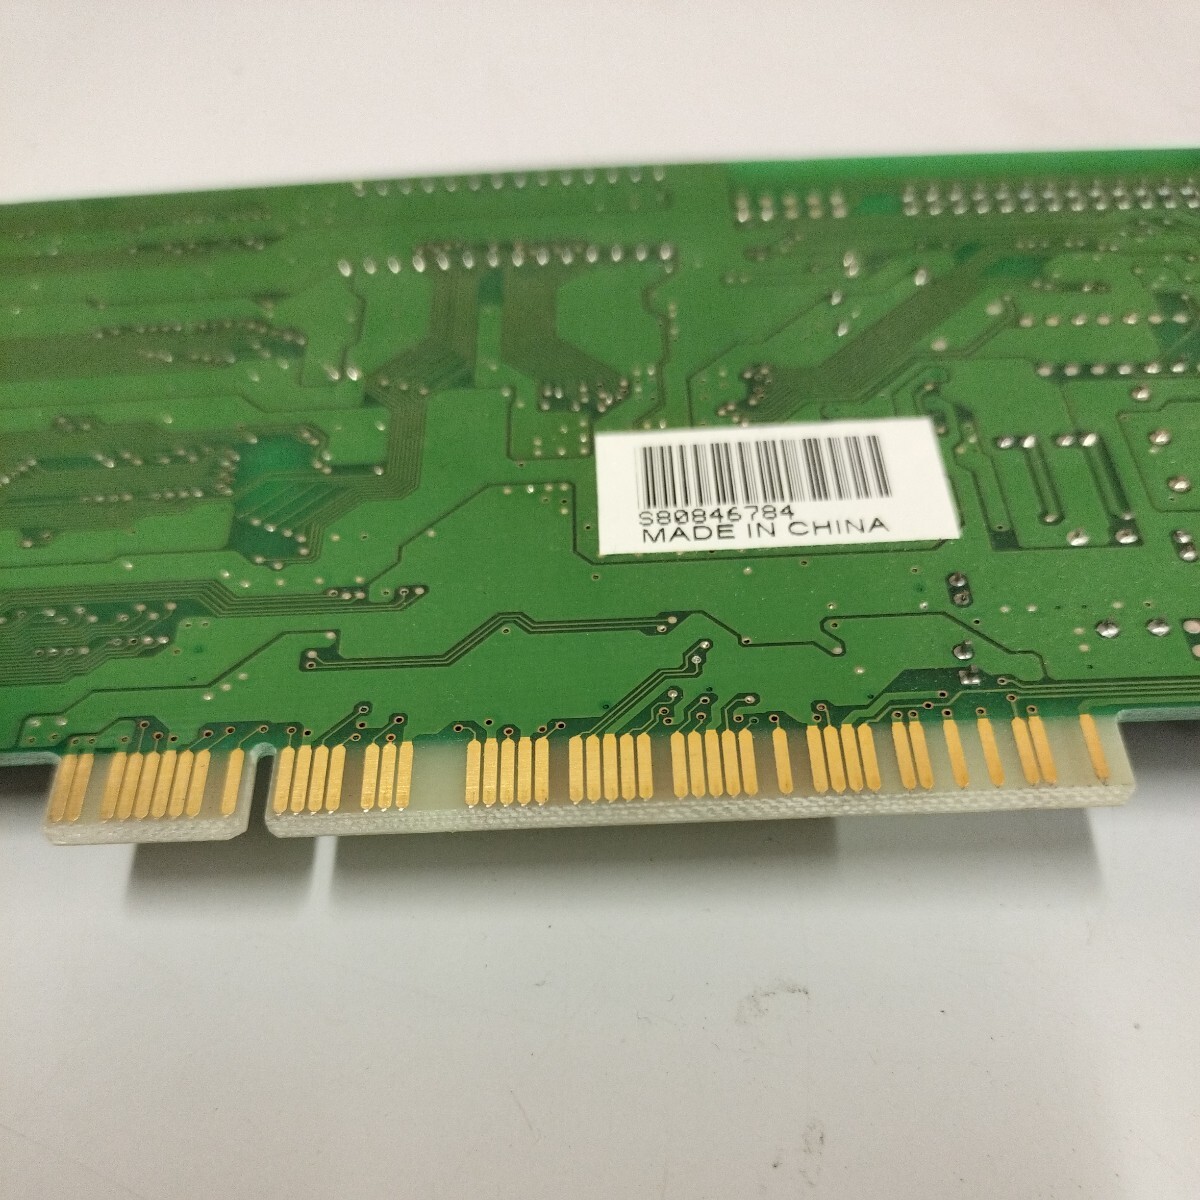  S3 Virge DX 4Mb - Sparkle SP-325A VGA PCI Graphics Video Card グラフィックカード 中古品 ジャンク品の画像7